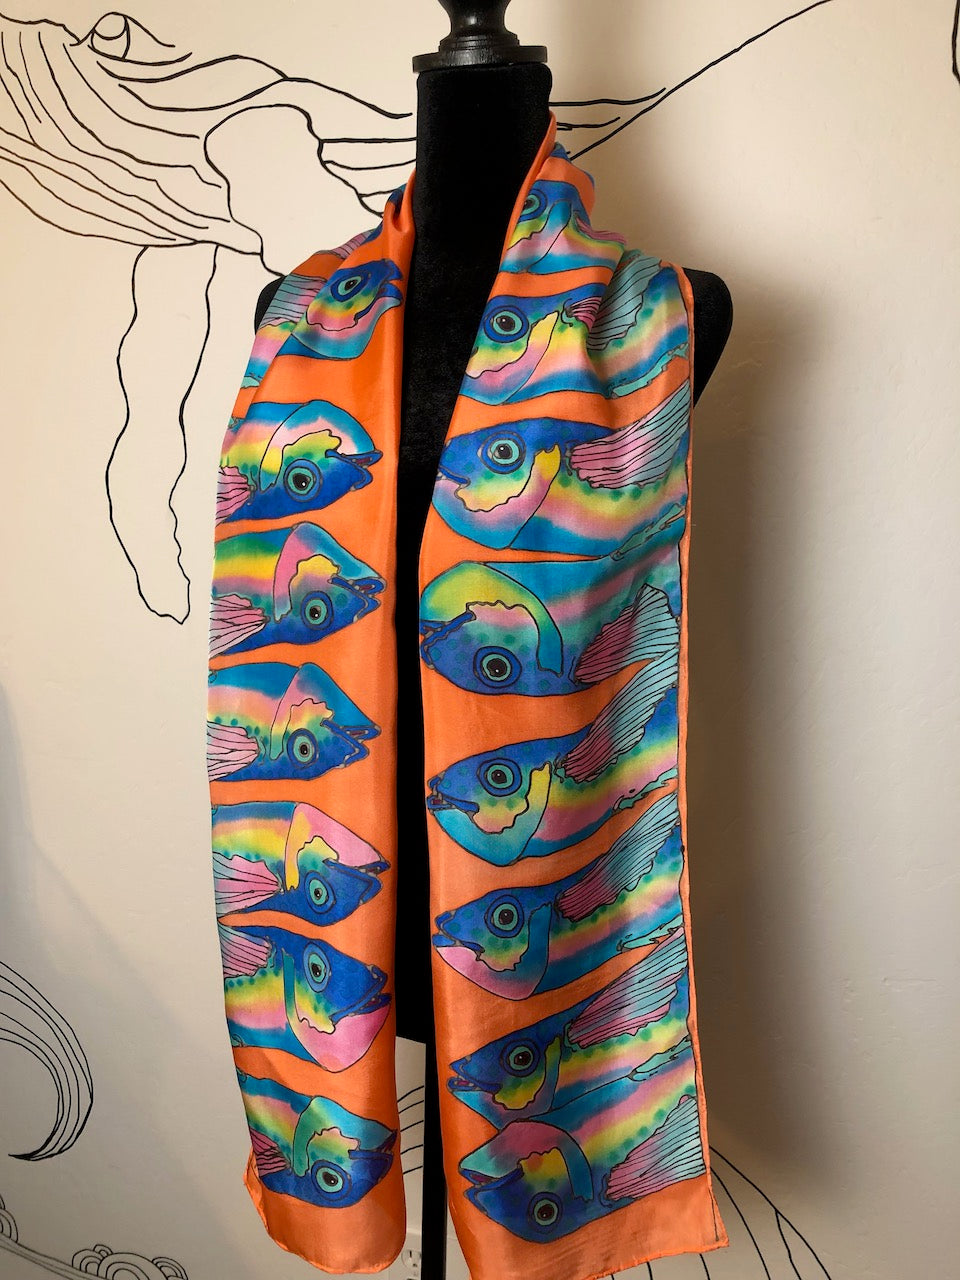 Lesliegh McDaniel: "Catch Of The Day" Silk Scarf